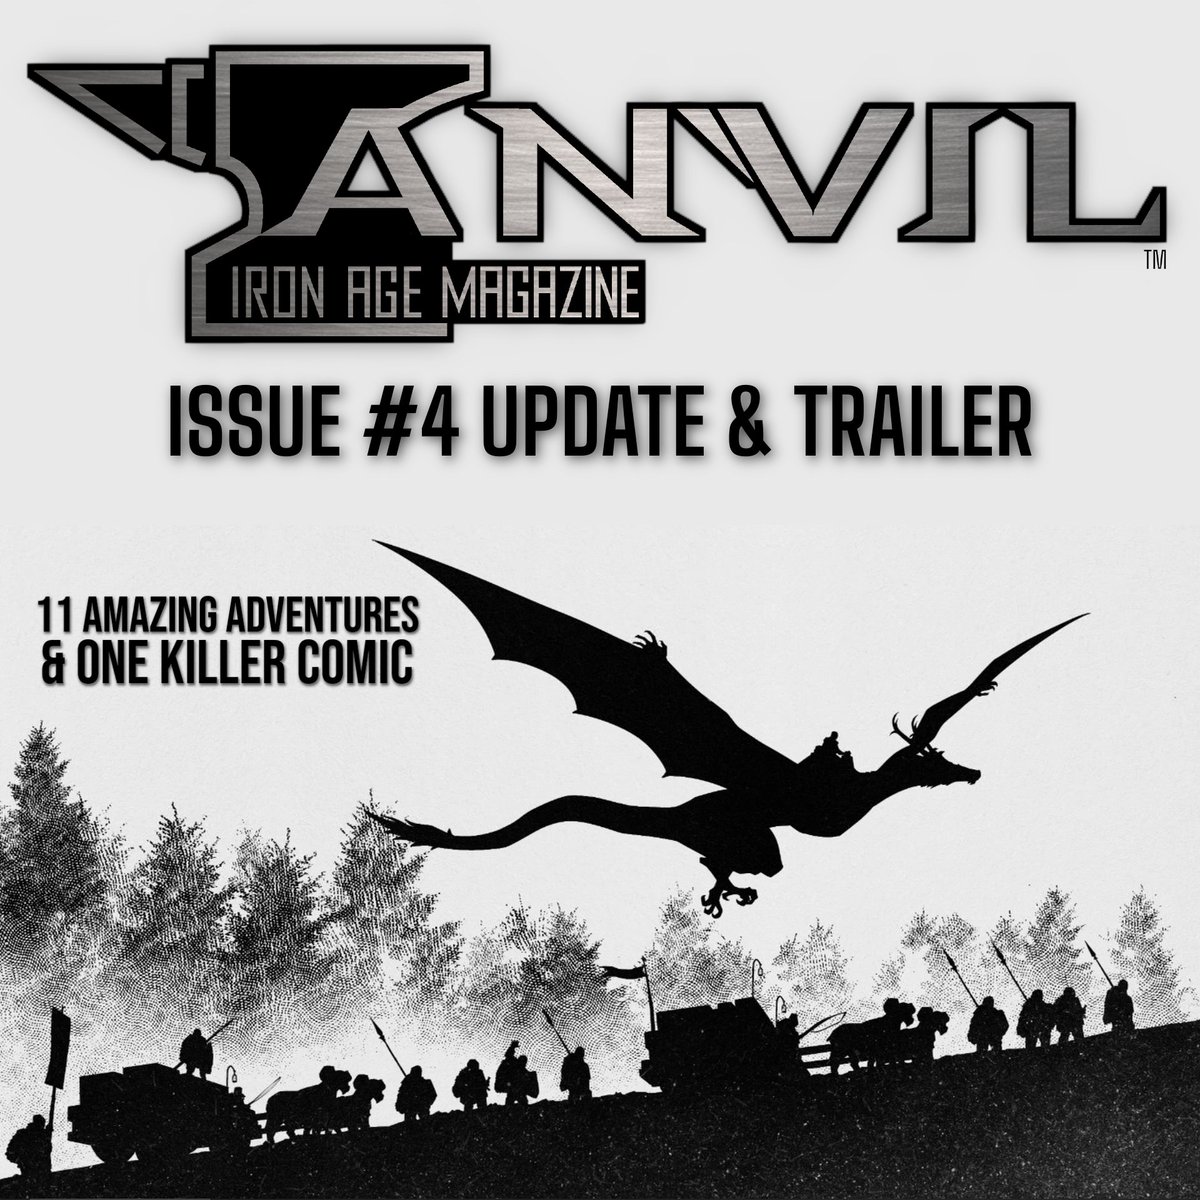 ANVIL #4 Updates New Trailer & New Faces! Check out the latest trailer and who is doing what in @AnvilMagazine! Shout out to @SCWKorsgaard, @stagescreen60, and @DevanyWilson! Read it here: ironage.media/post/anvil-4-u… #IronAge #sff #fantasy #magazine